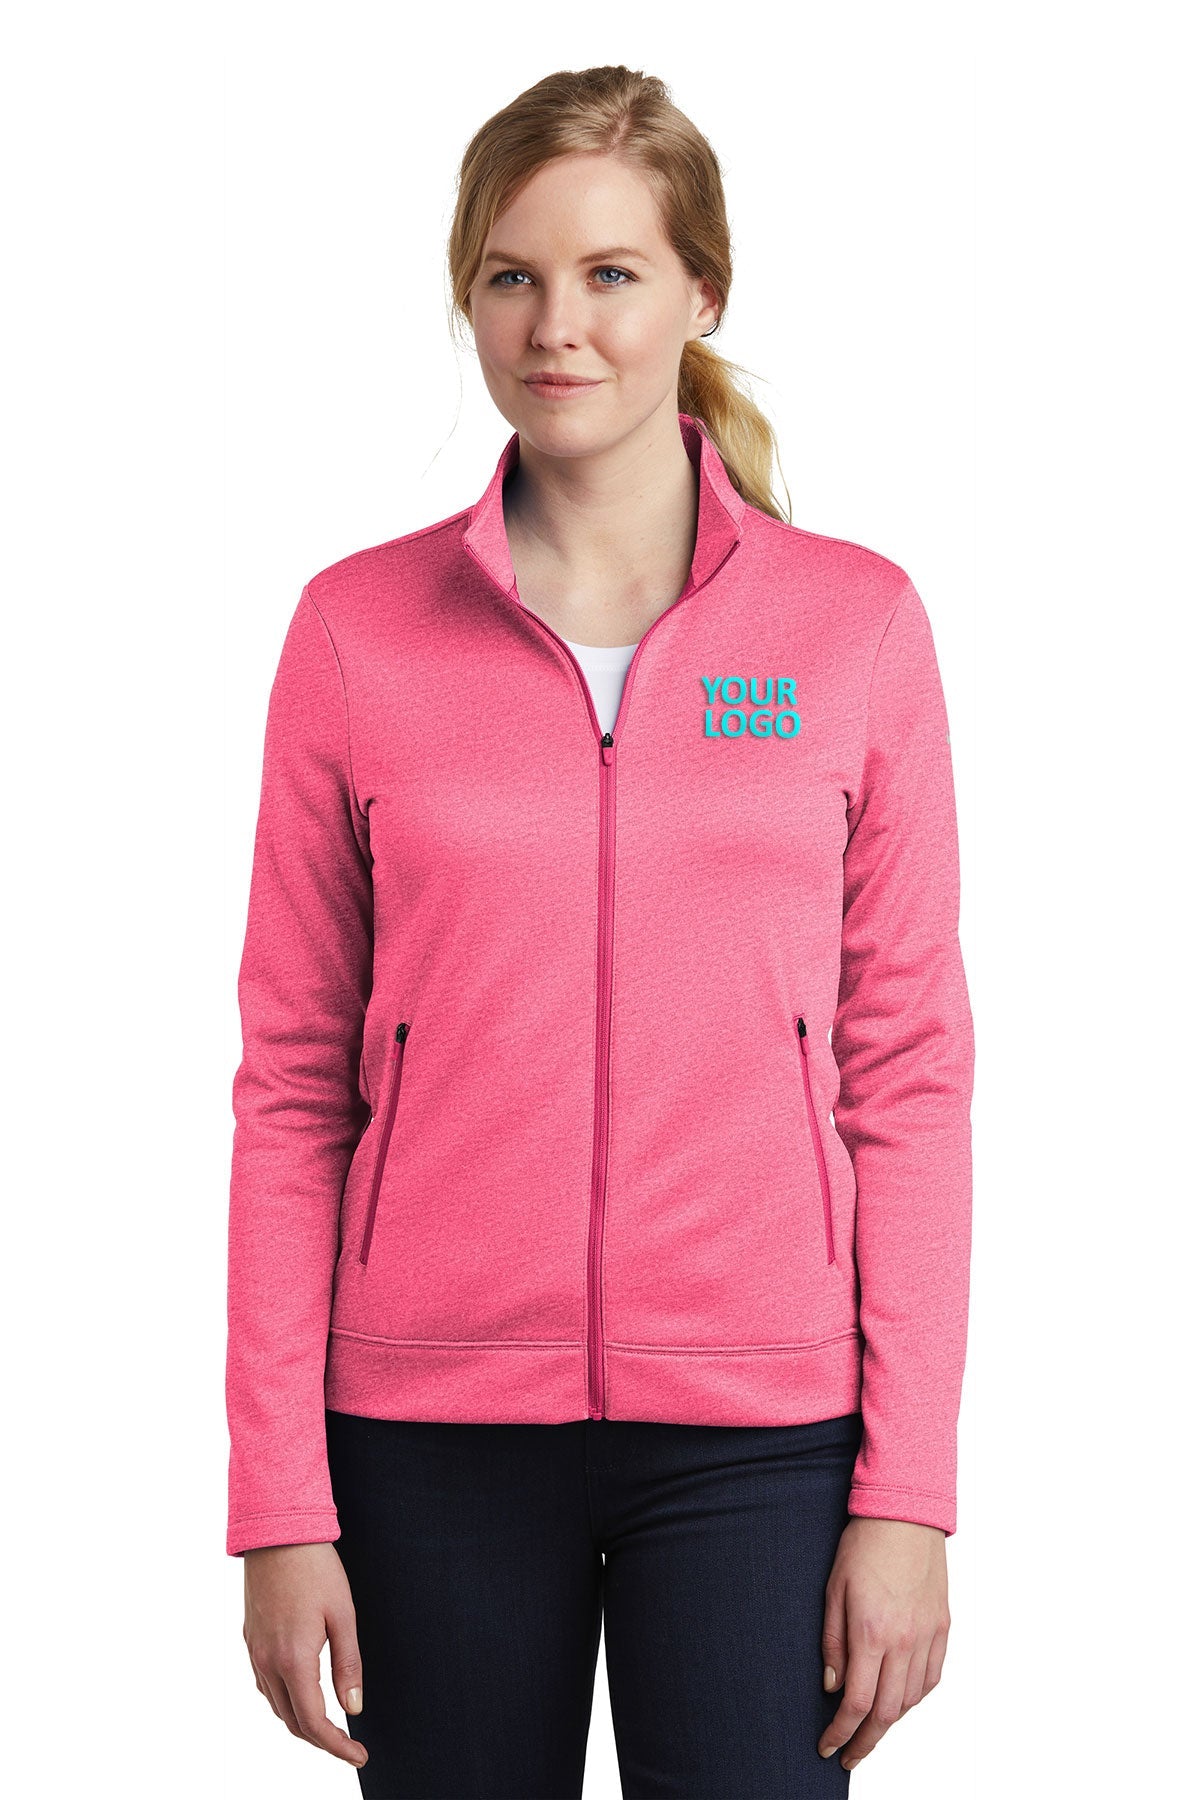 Nike Vivid Pink Heather NKAH6260 embroidered jackets for business